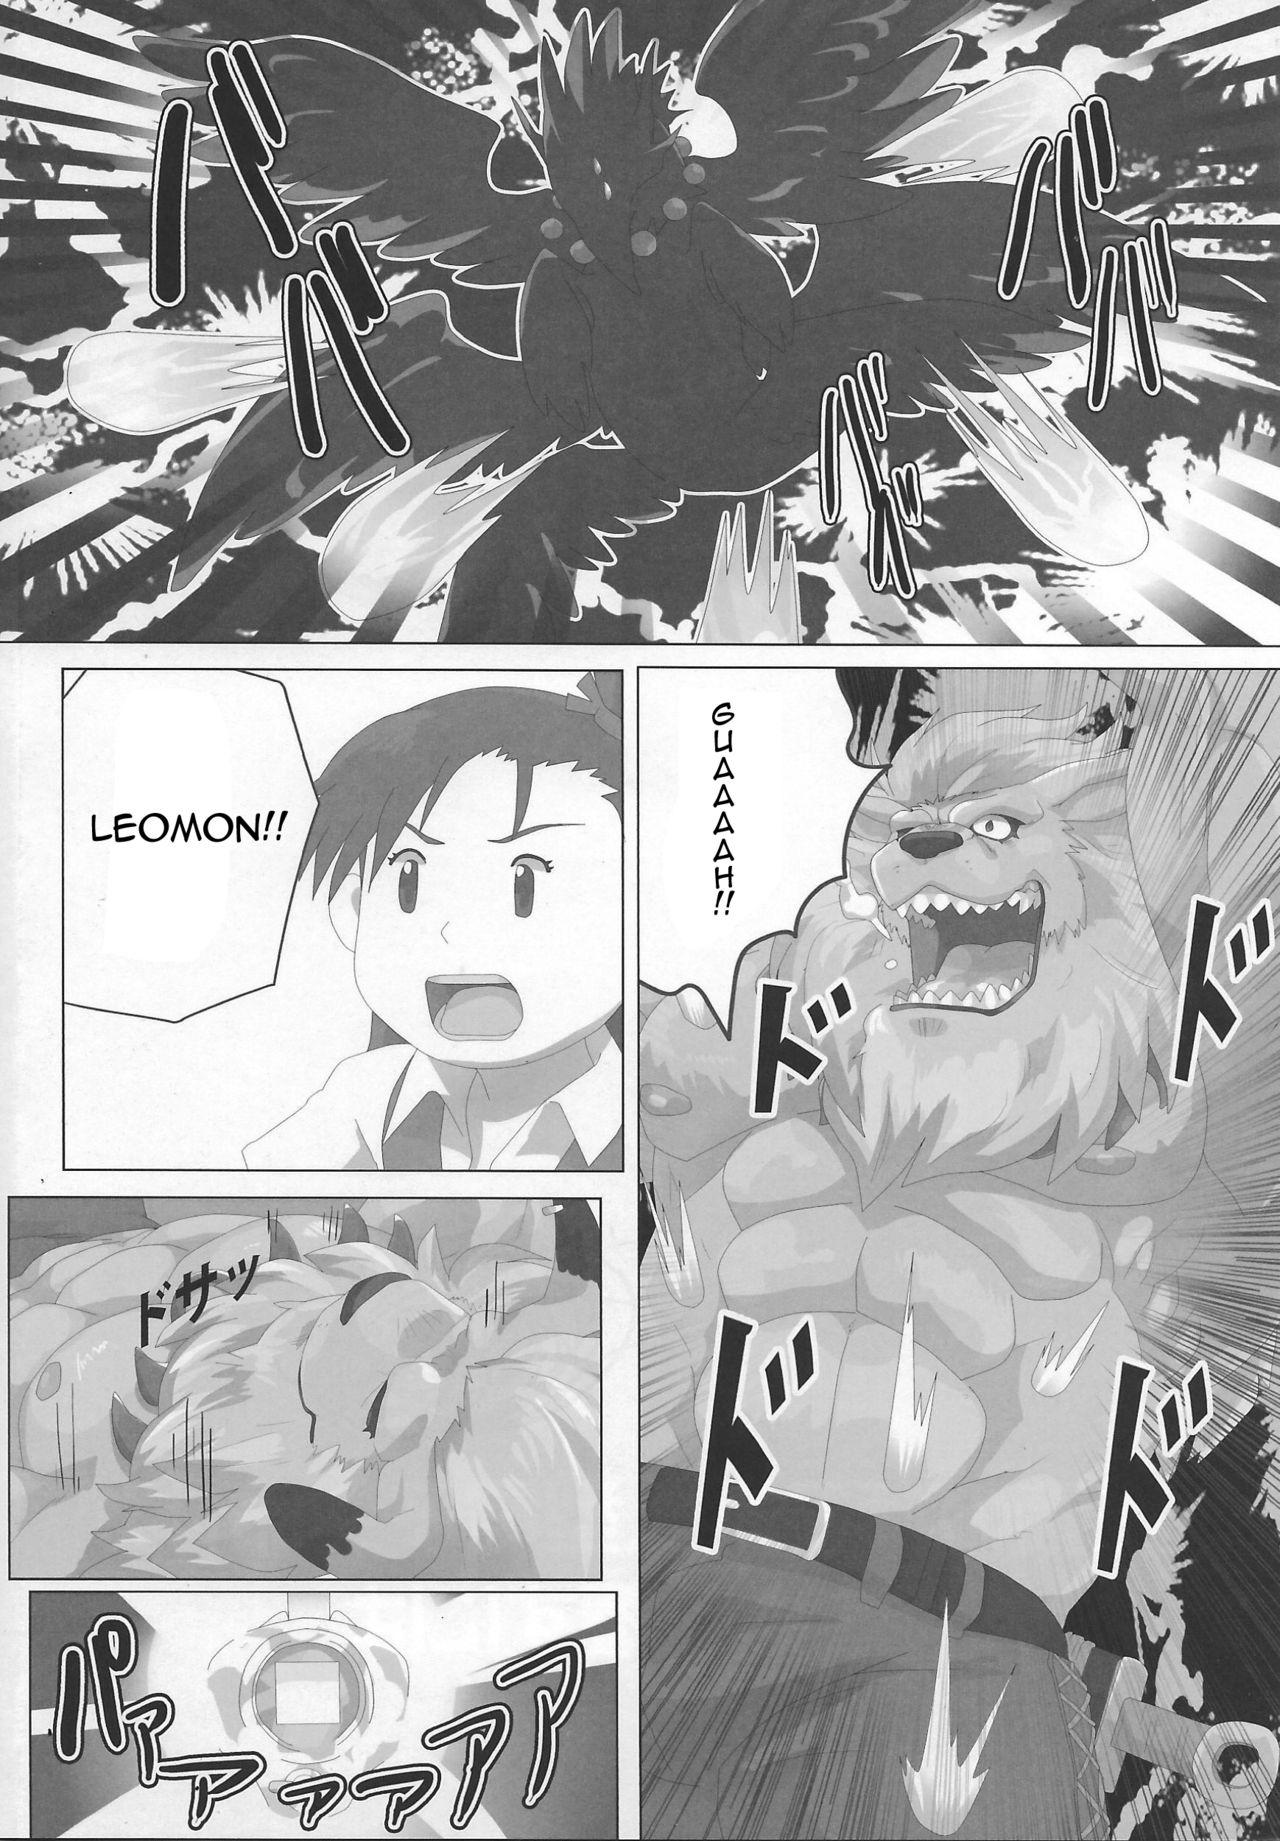 [Debirobu] For the Lion-Man Type Electric Life Form to Overturn Fate - Leomon Doujin [ENG] 3